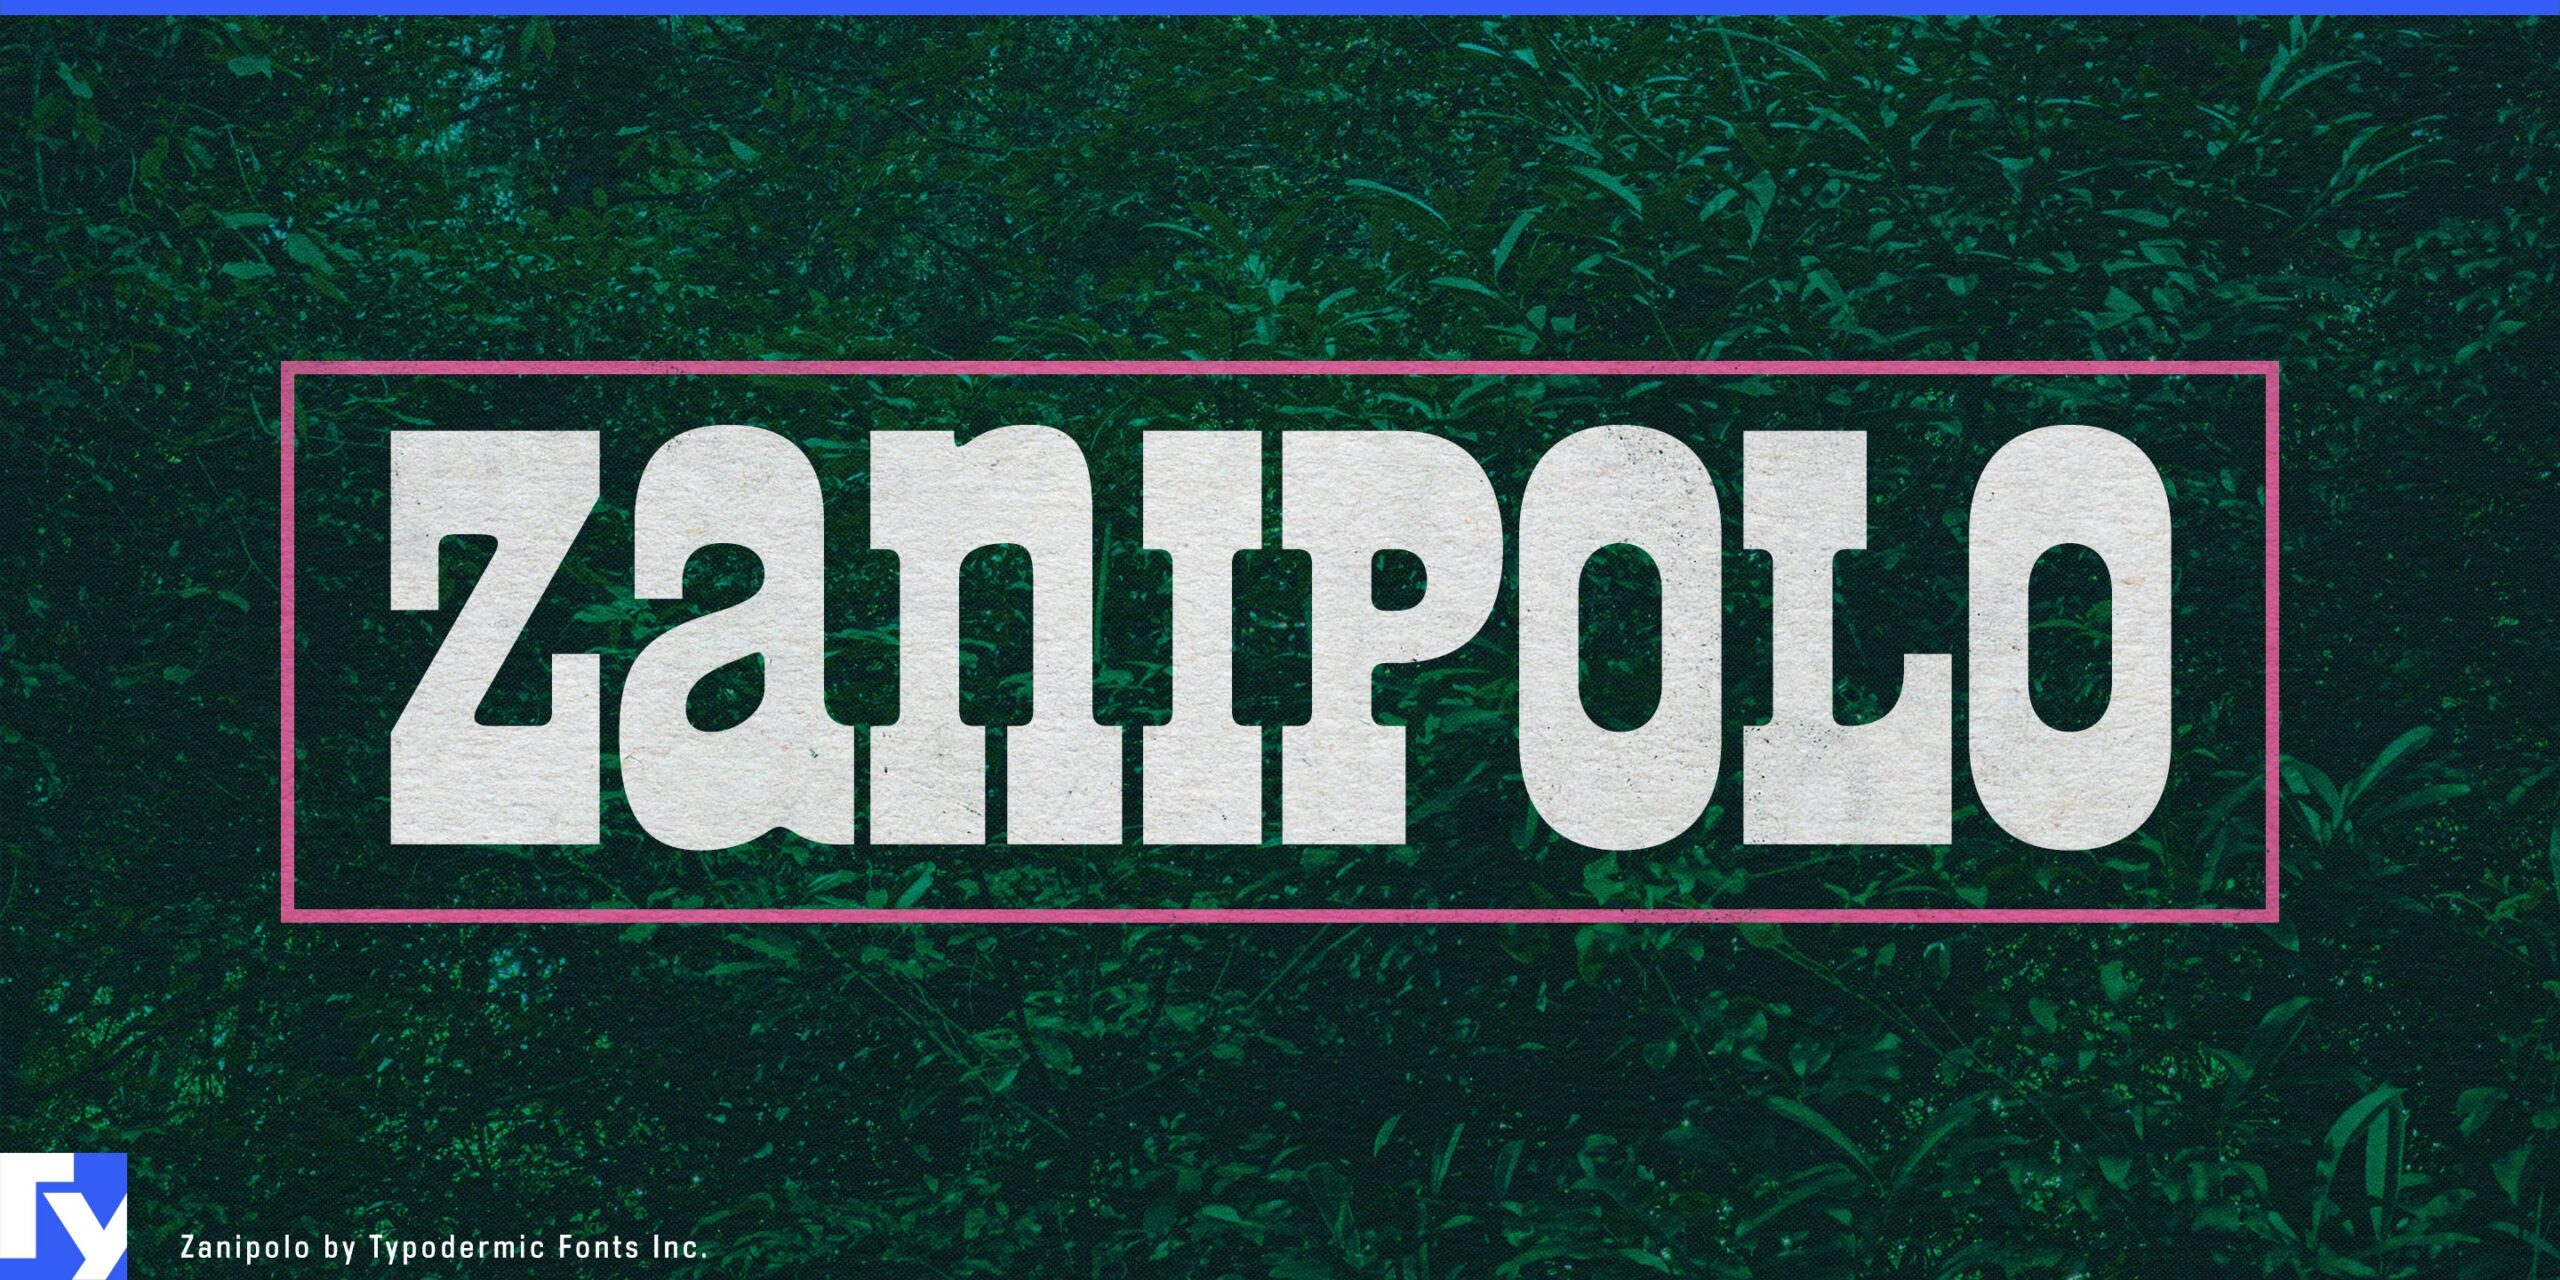 A sample of the Zanipolo typeface from Typodermic Fonts Inc.